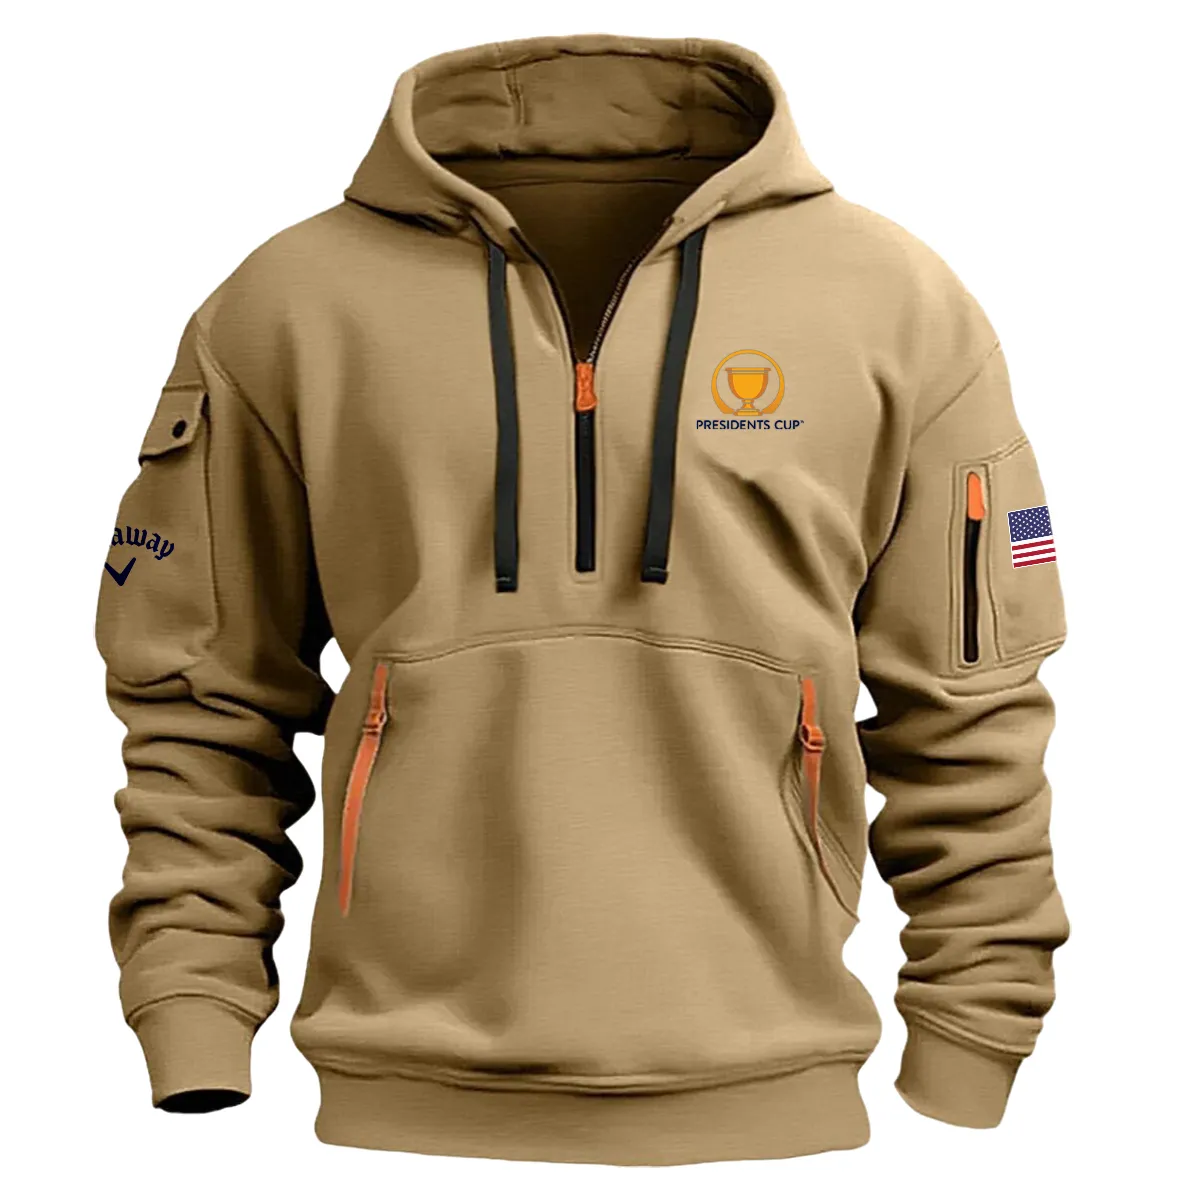 Khaki Color Callaway Fashion Hoodie Half Zipper Presidents Cup Gift For Fans